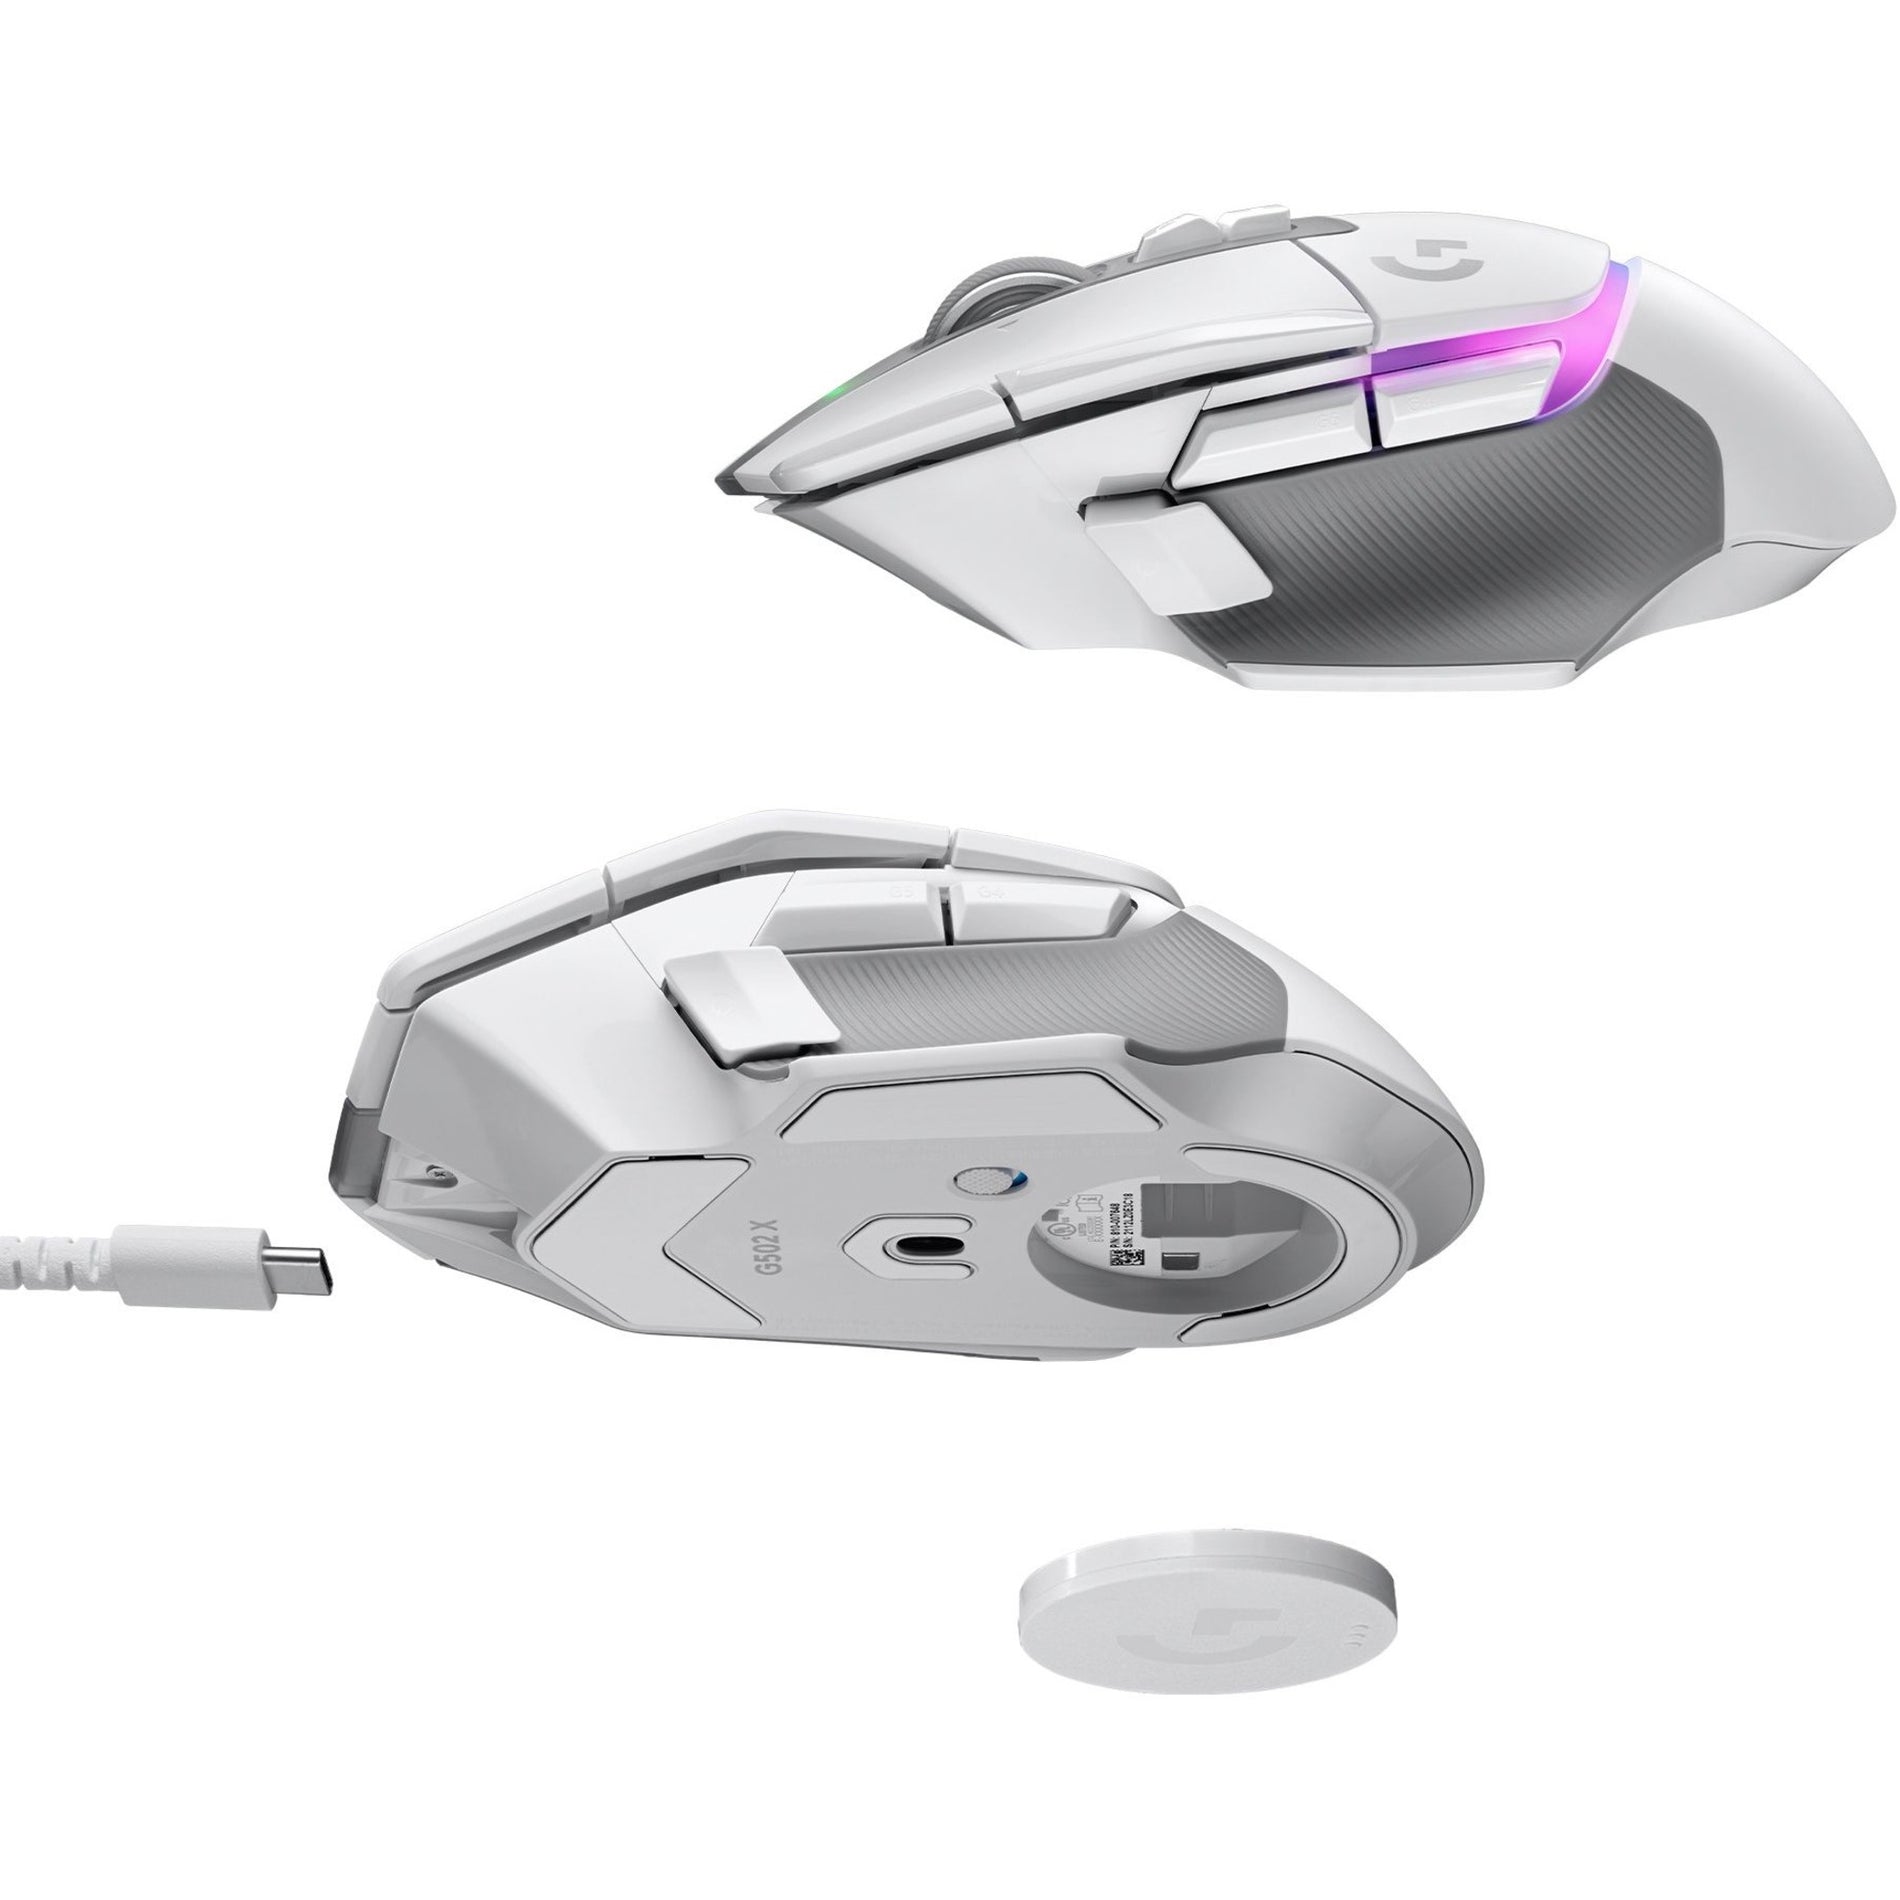 Logitech 910-006169 G502 X PLUS LIGHTSPEED Wireless Gaming Mouse, Rechargeable, 13 Programmable Buttons, USB Type C